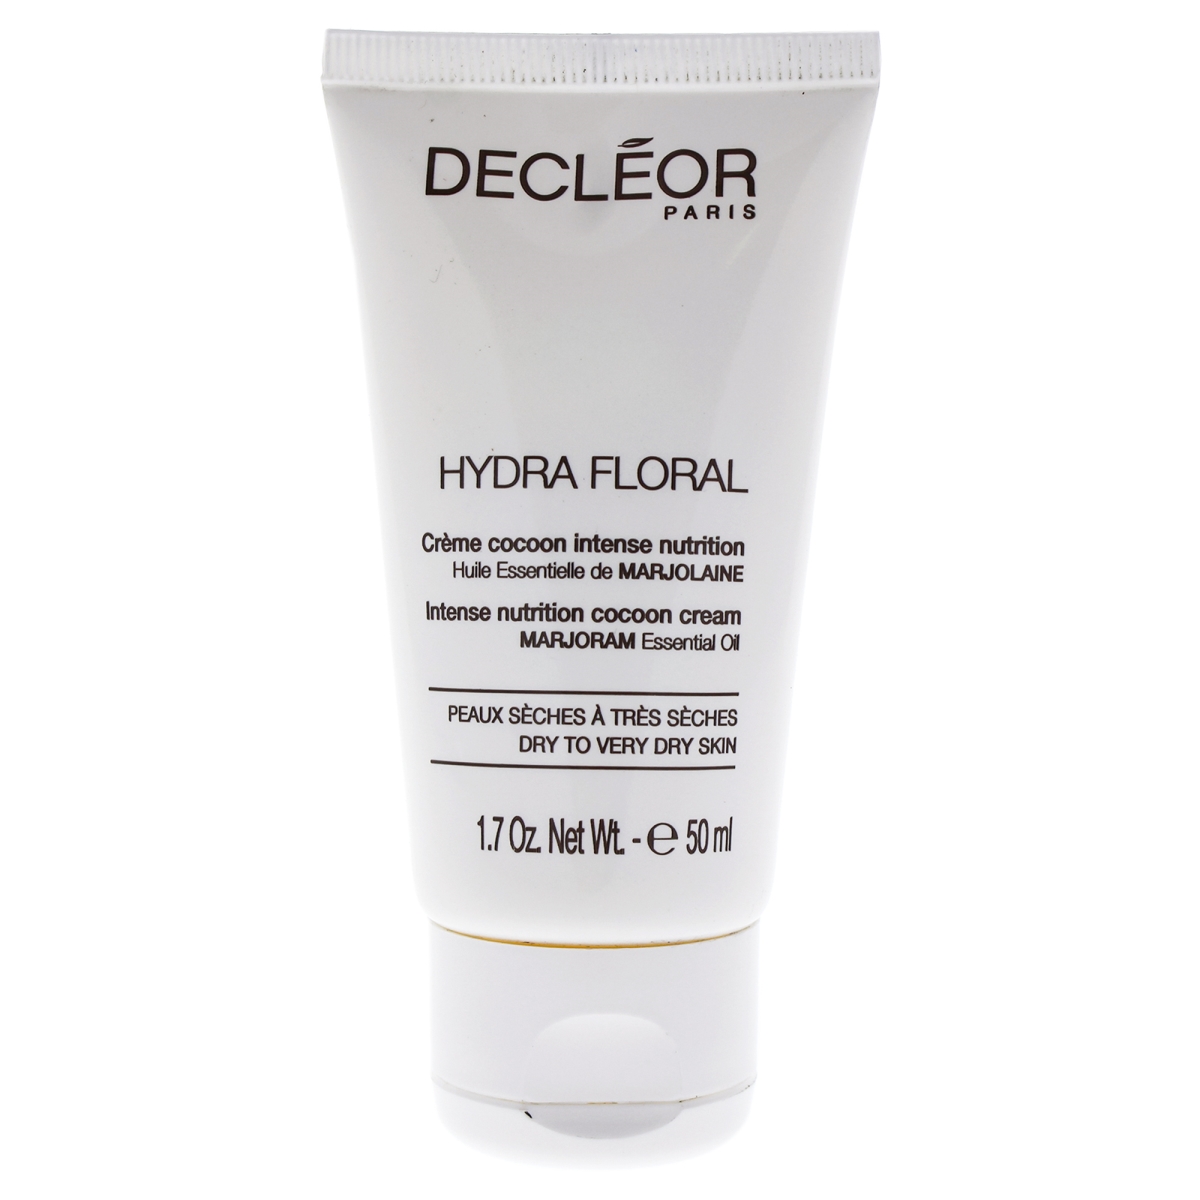 I0086452 Hydra Floral Intense Nutrition Cocoon Cream For Unisex - 1.7 Oz